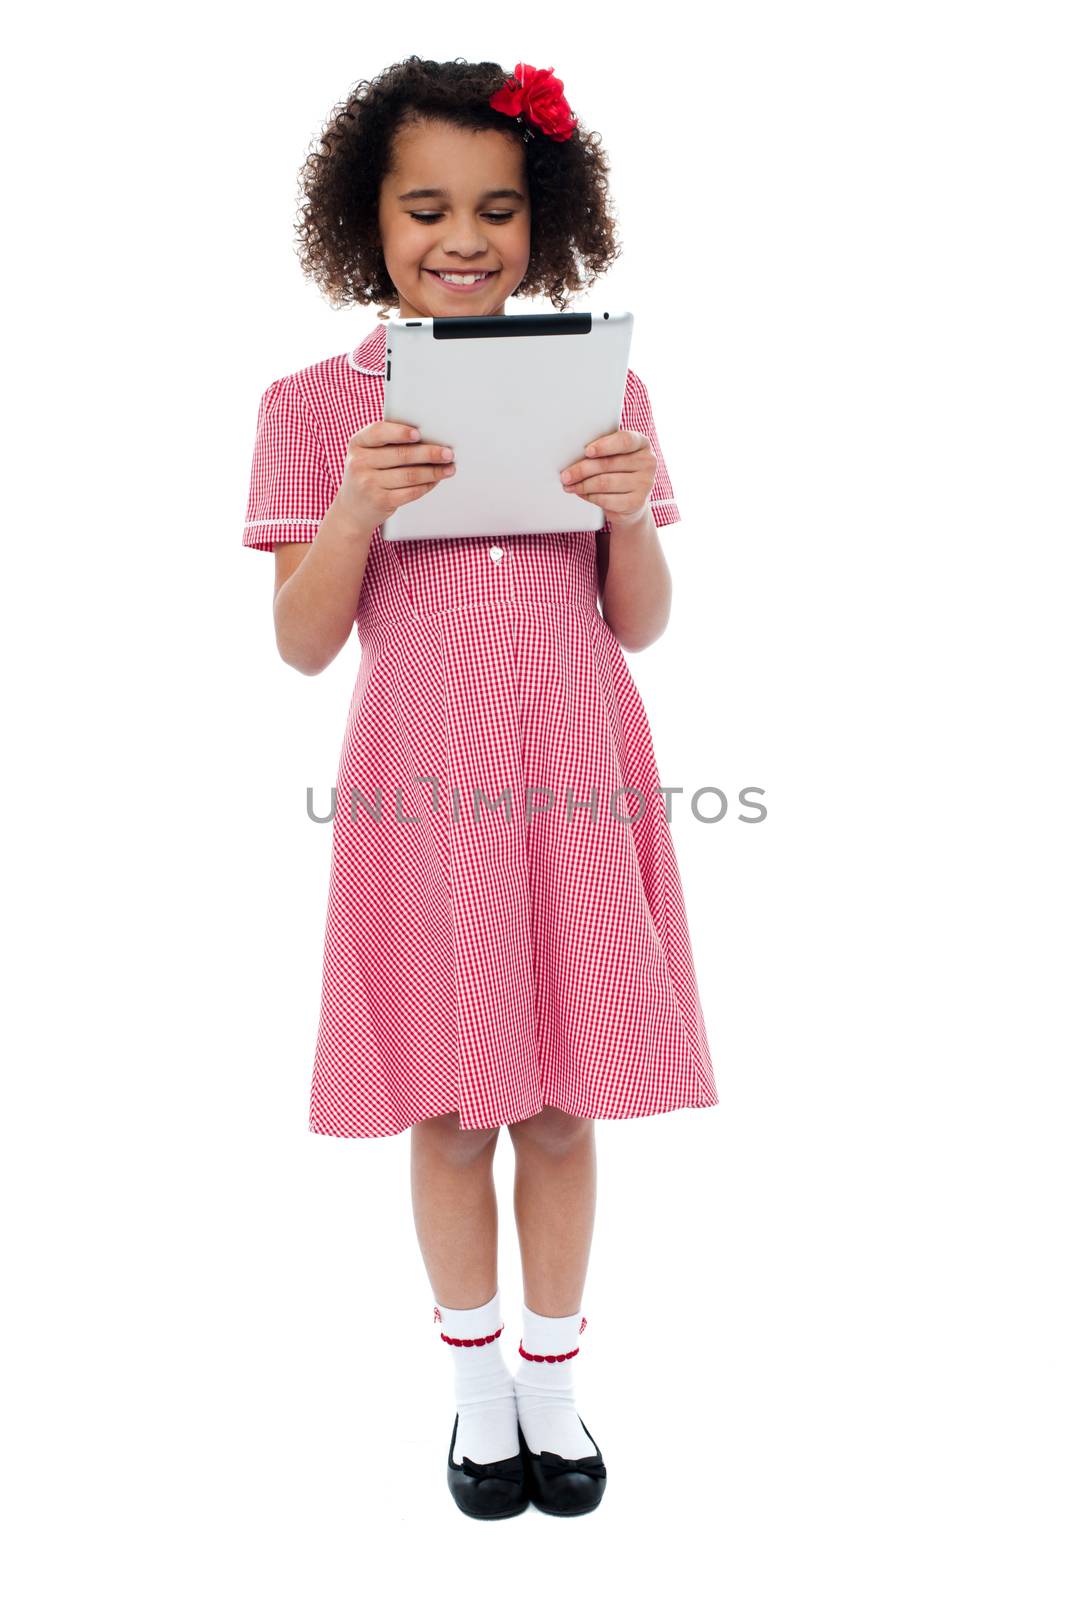 Smiling young girl using tablet computer 